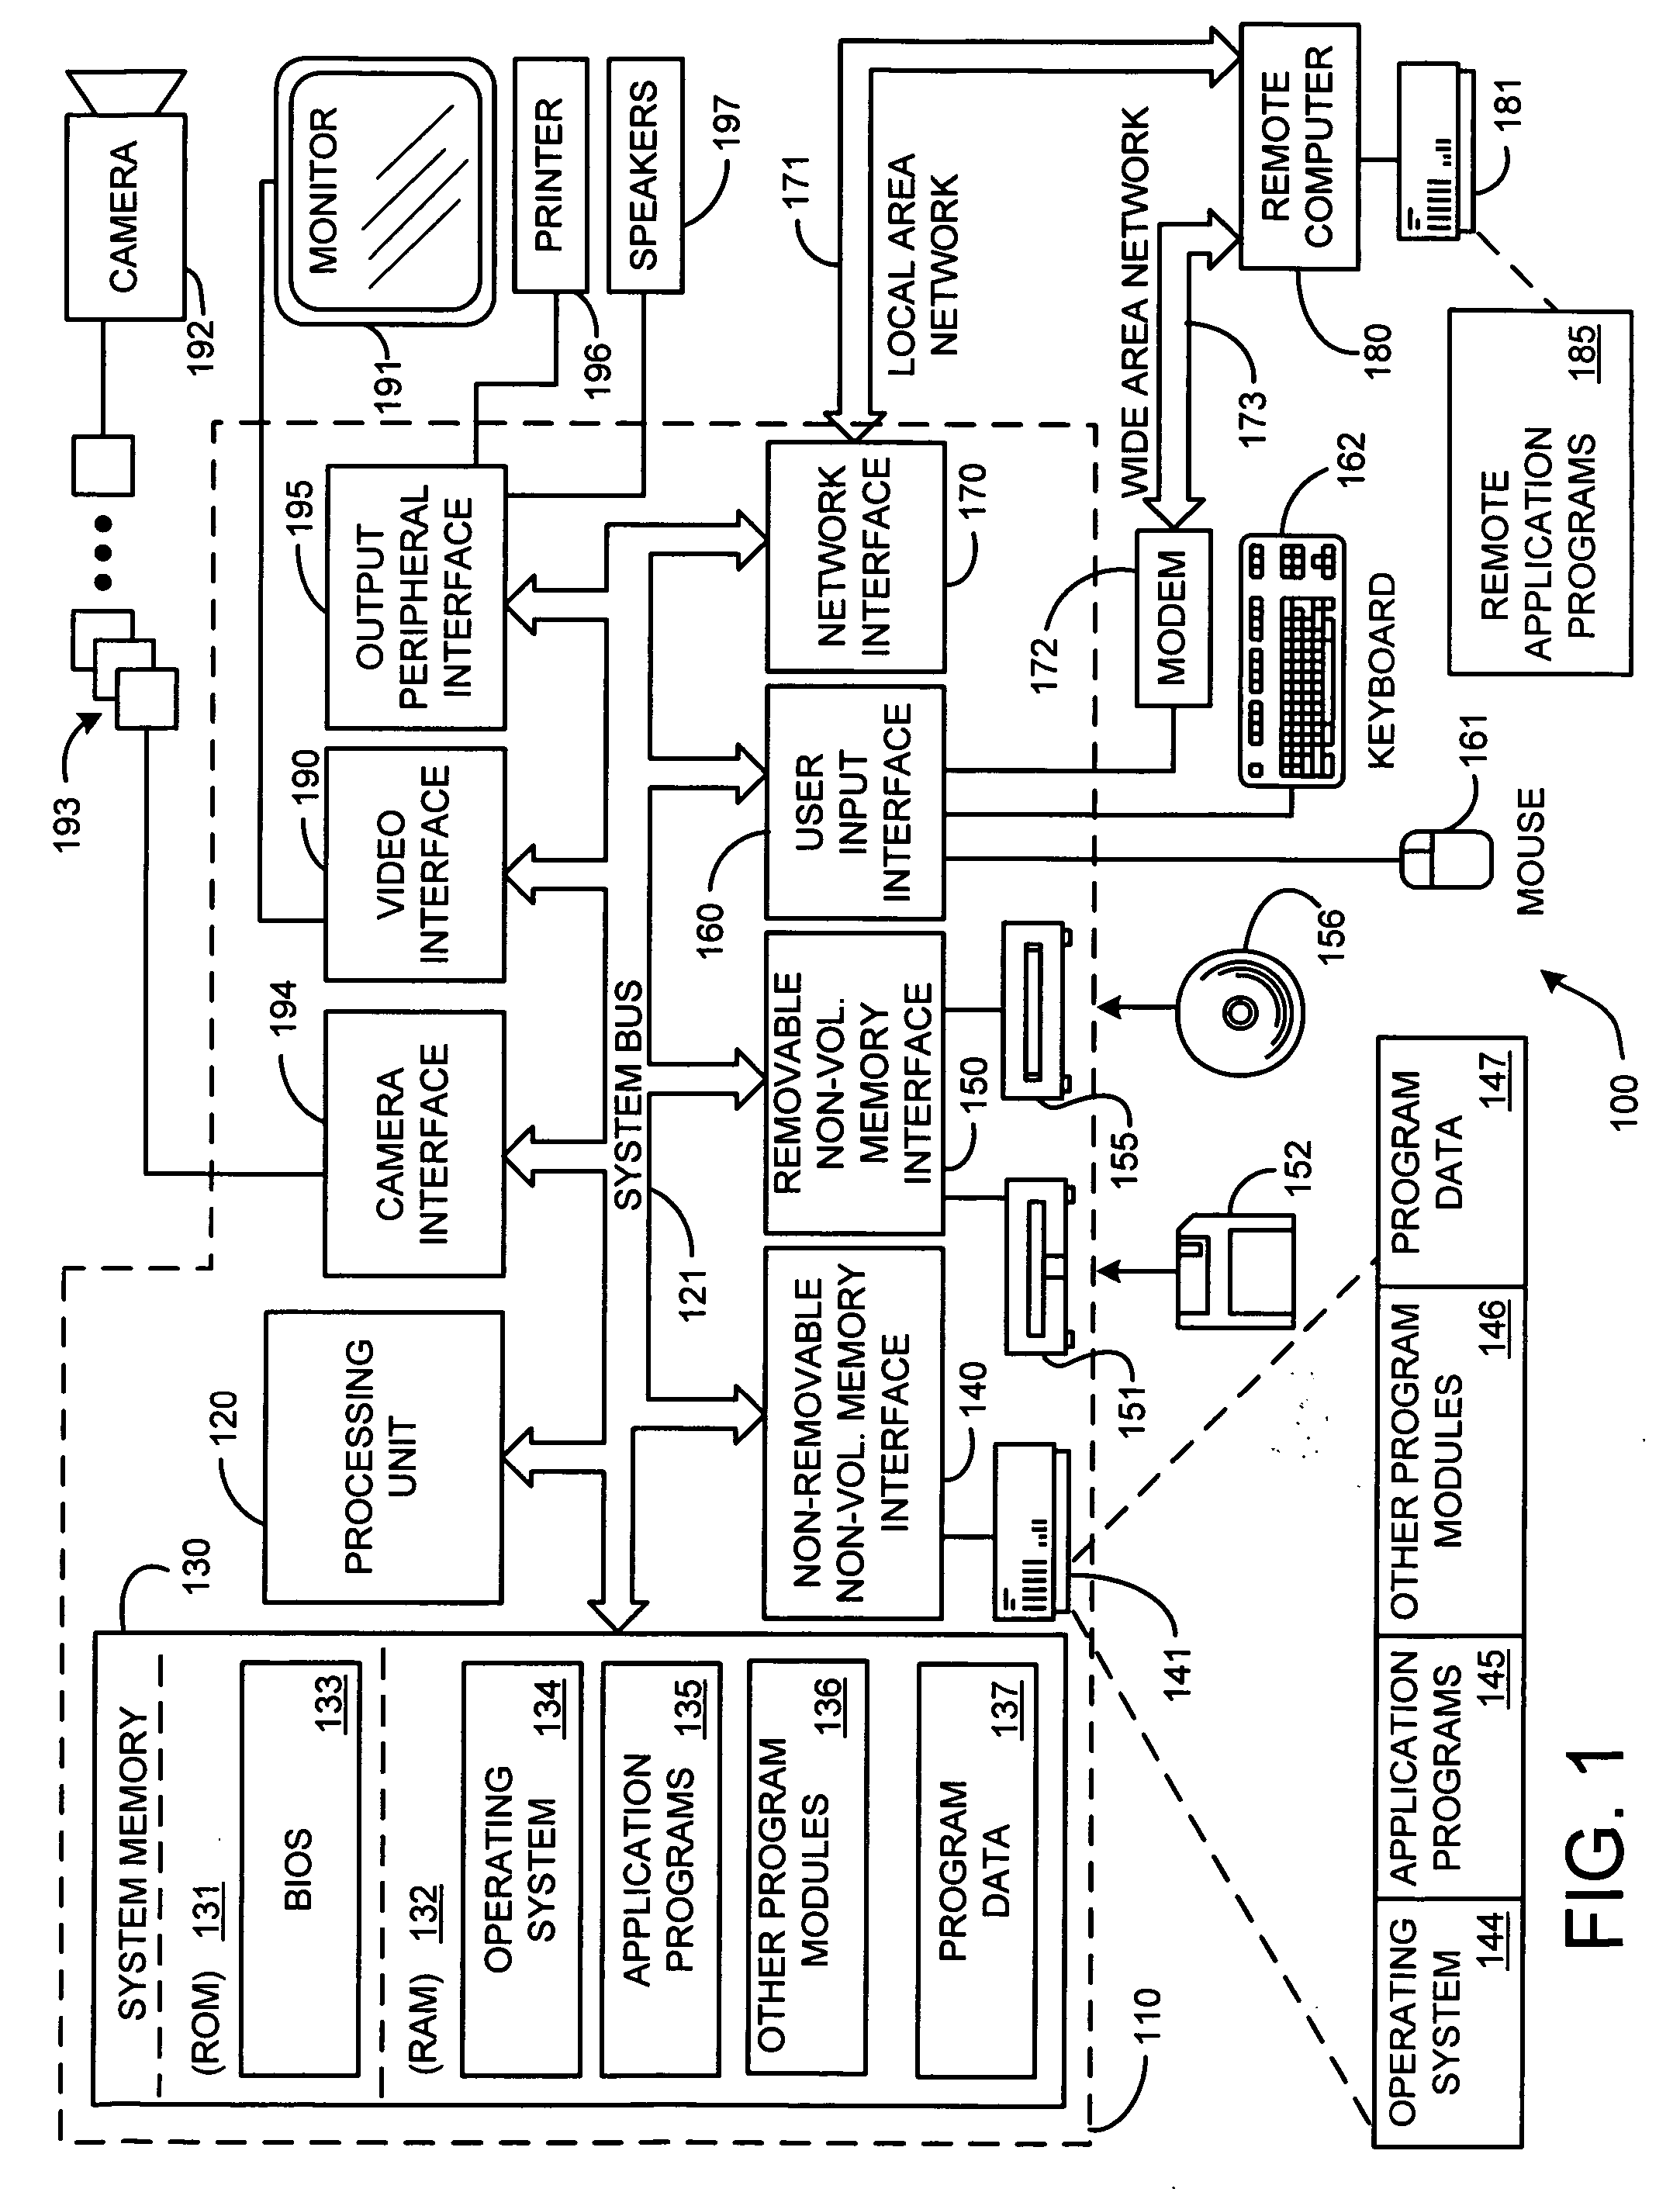 System and process for compressing and decompressing multiple, layered, video streams of a scene captured from different viewpoints forming a grid using spatial and temporal encoding